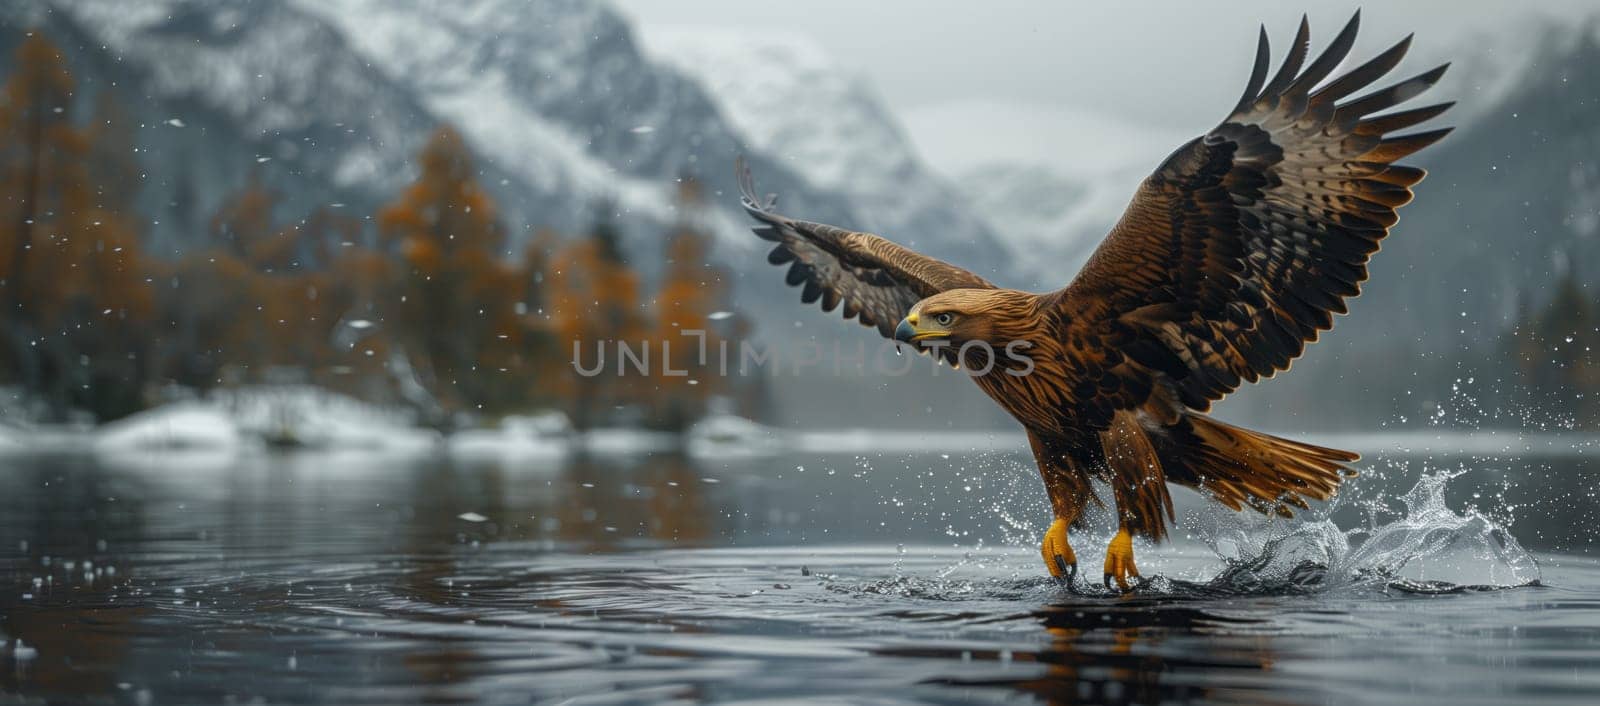 A Bald Eagle, a bird of prey, soars over water with mountains in the background by richwolf